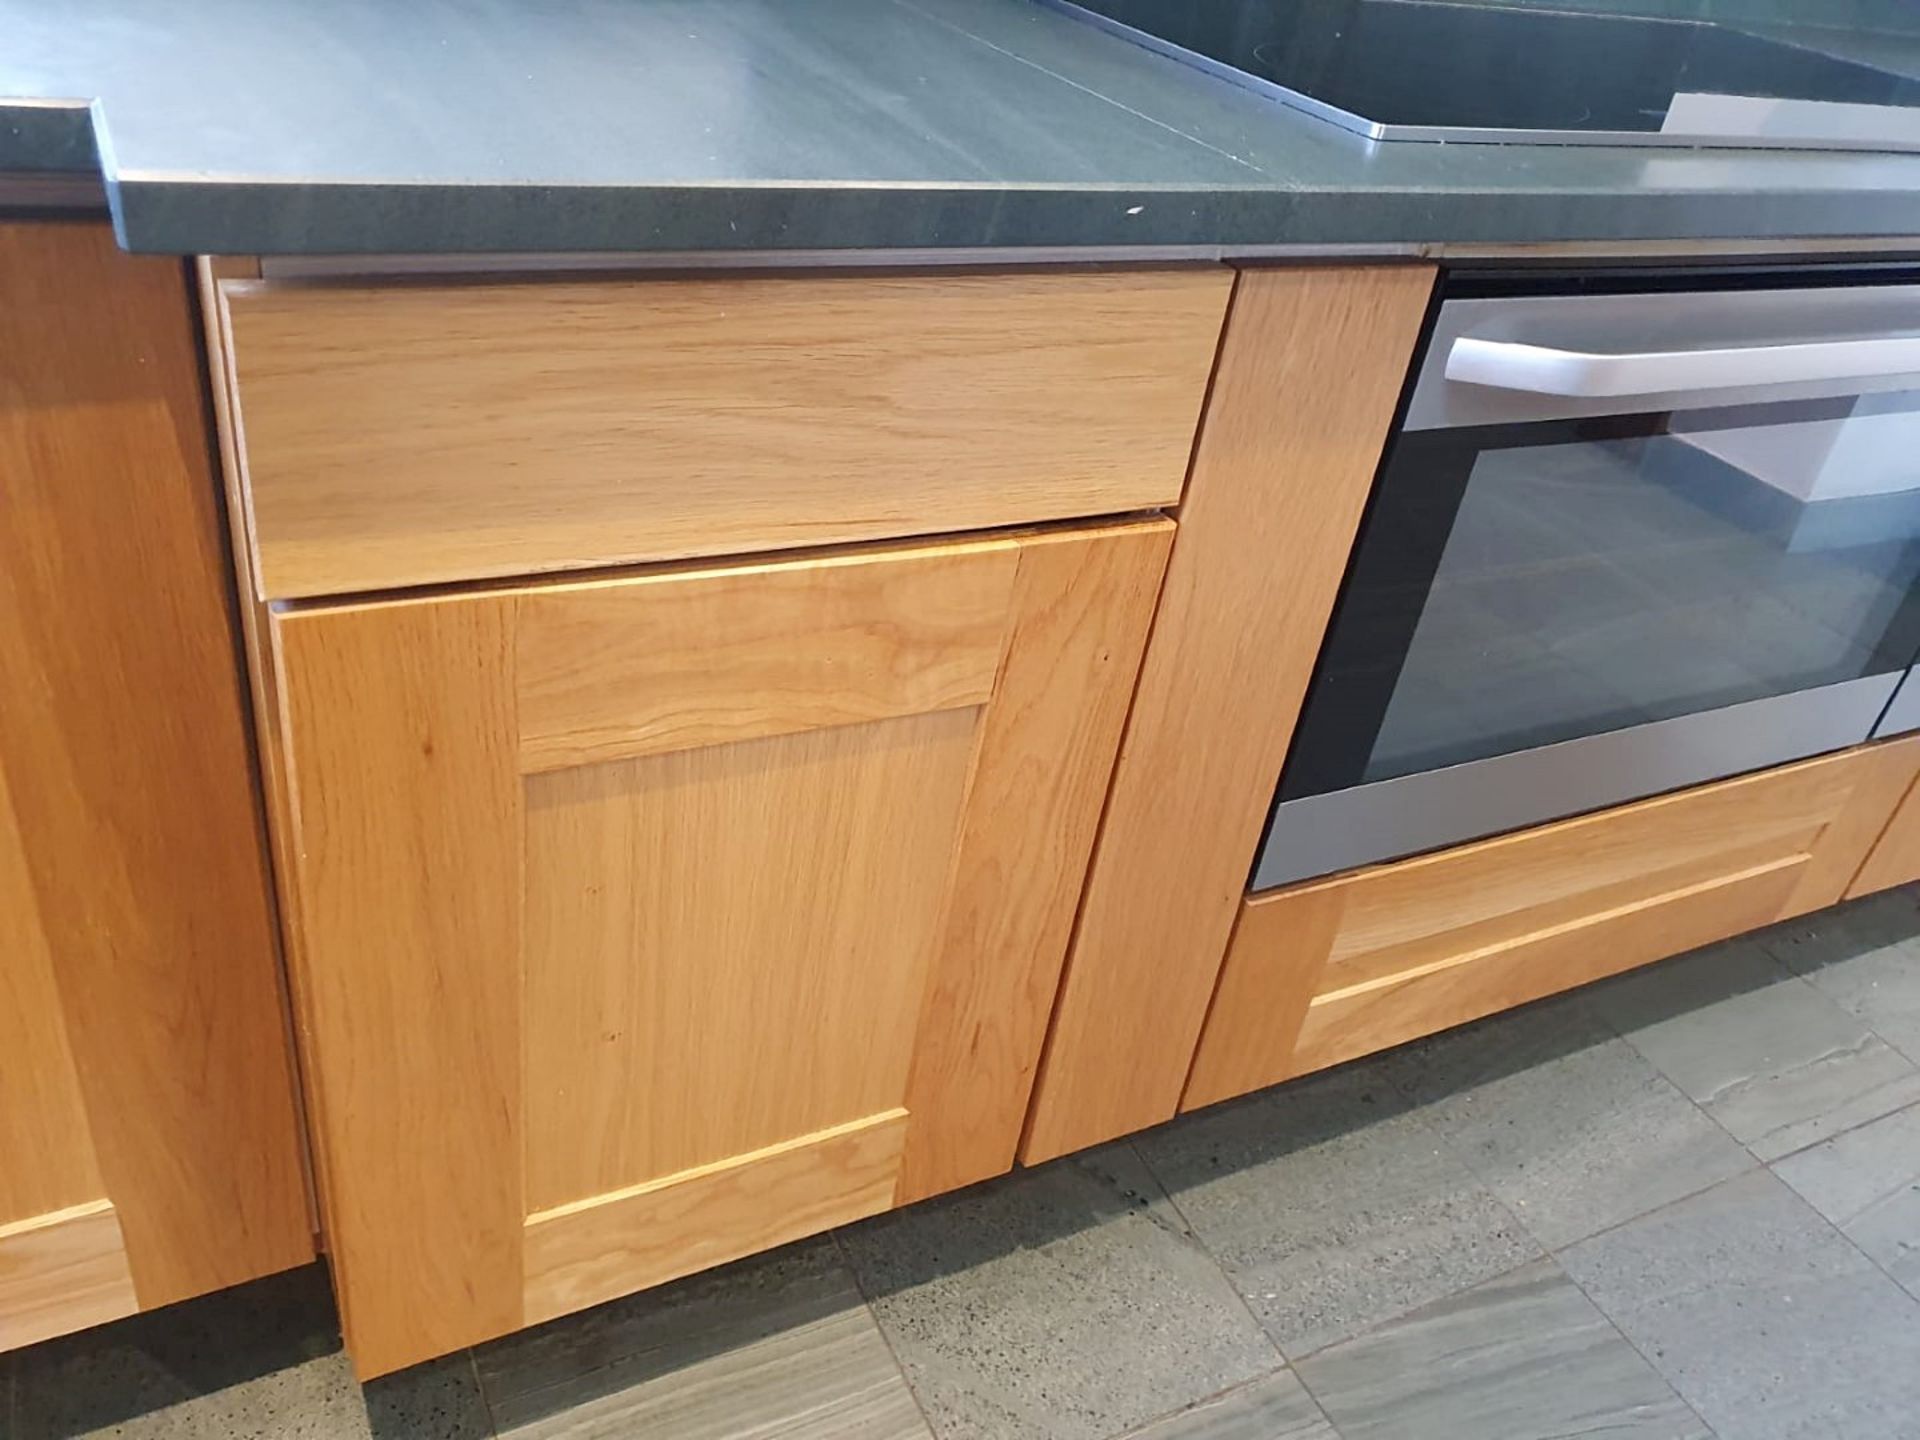 1 x Solid Oak Fitted Kitchen With Intergrated Miele Appliancess - CL487 - Location: Wigan *NO VAT* - Image 28 of 82